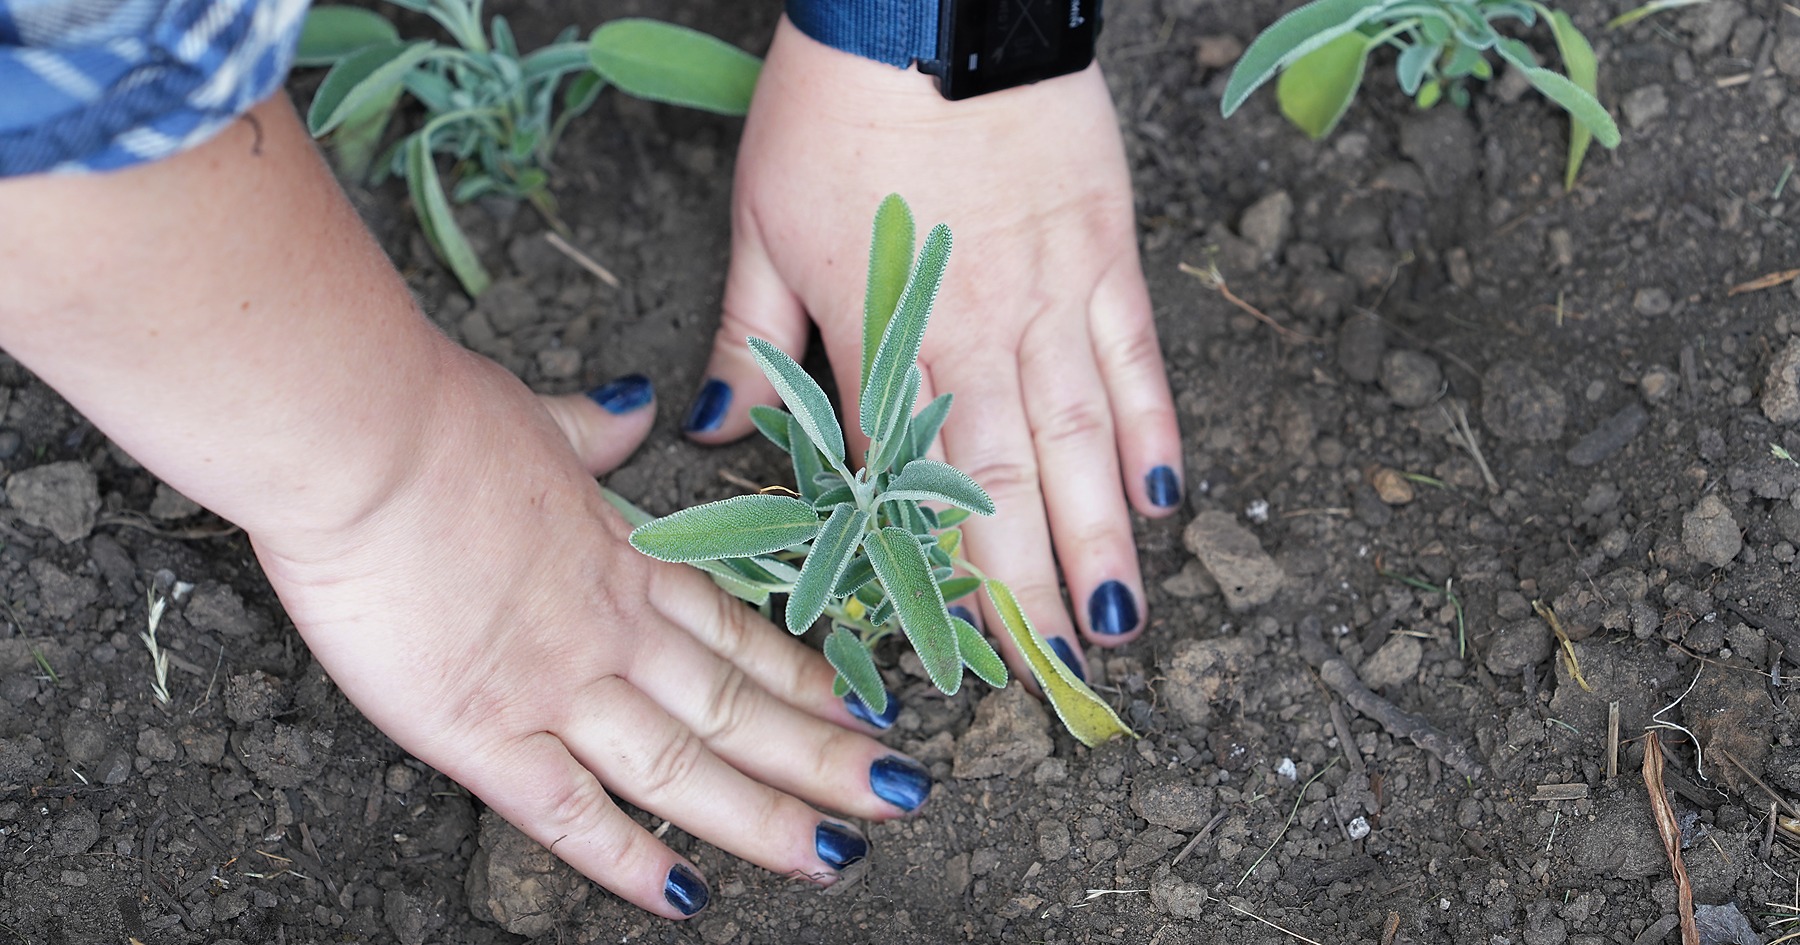 A close-up of hands with blue nail polish planting sage next to the Native American Educational and Cultural Center